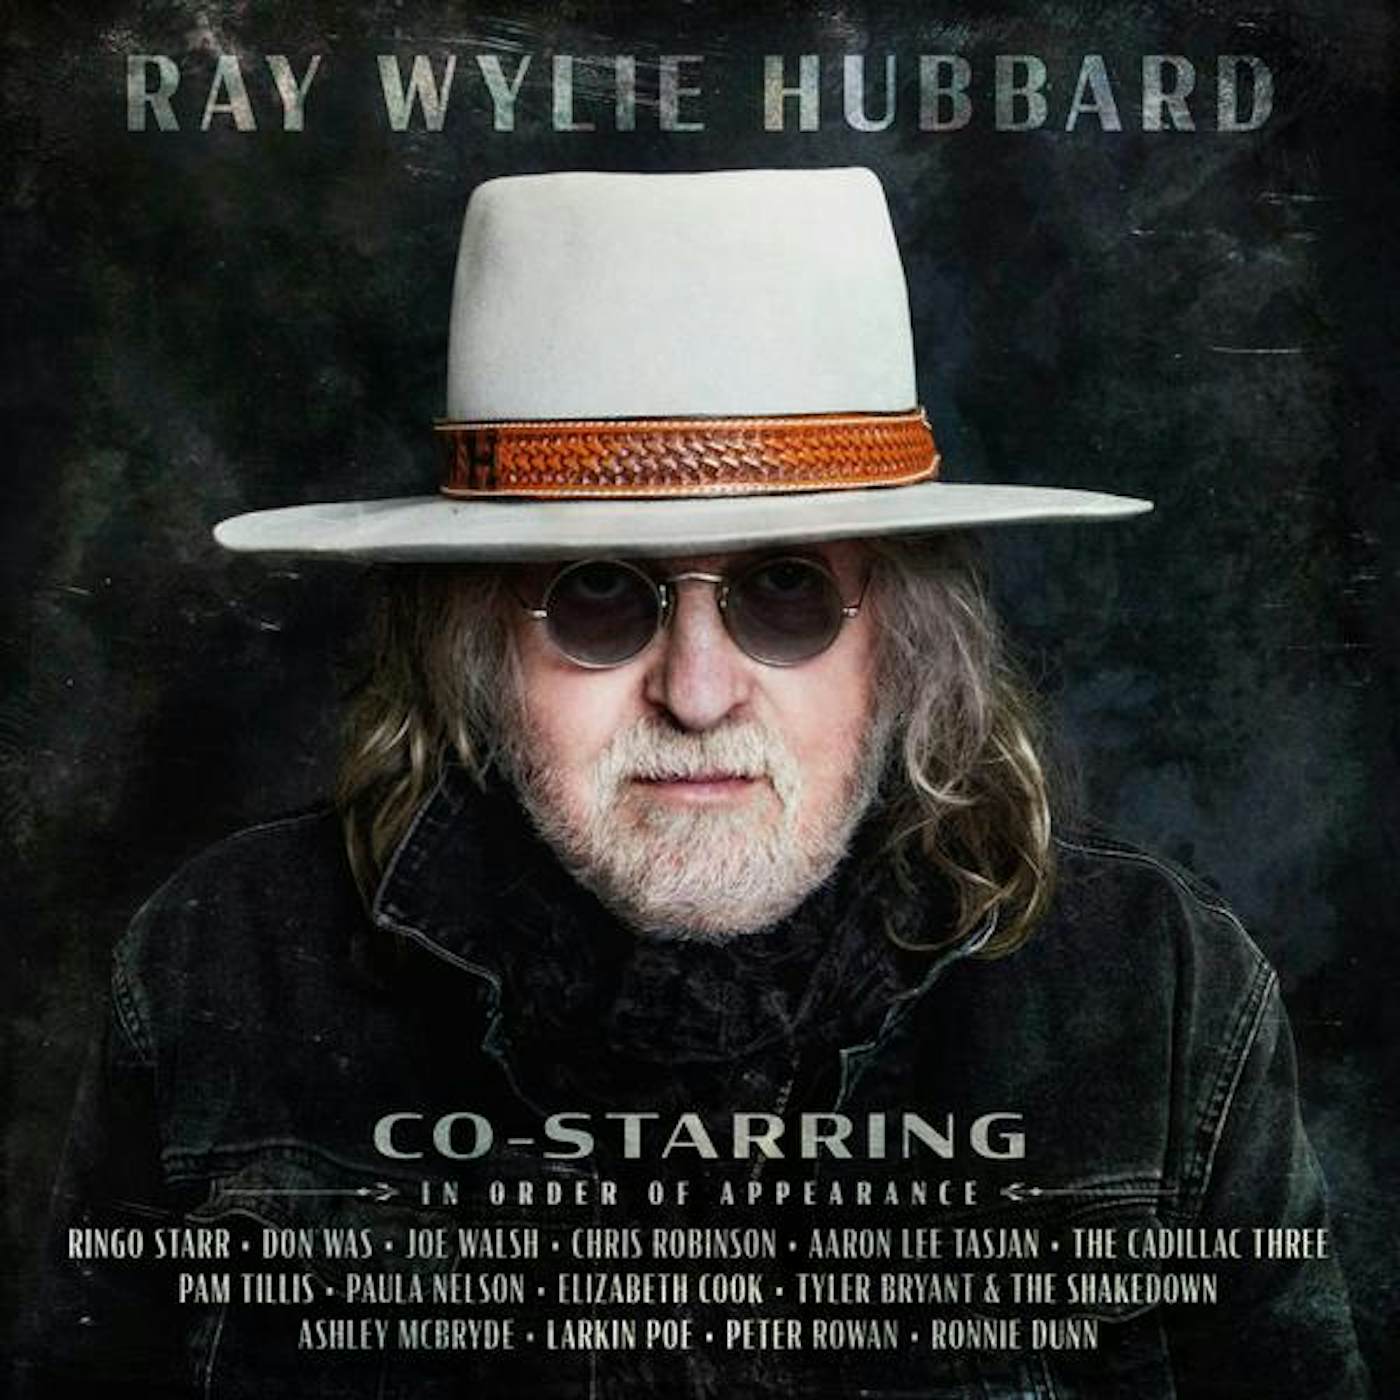 Ray Wylie Hubbard Co-Starring Vinyl Record